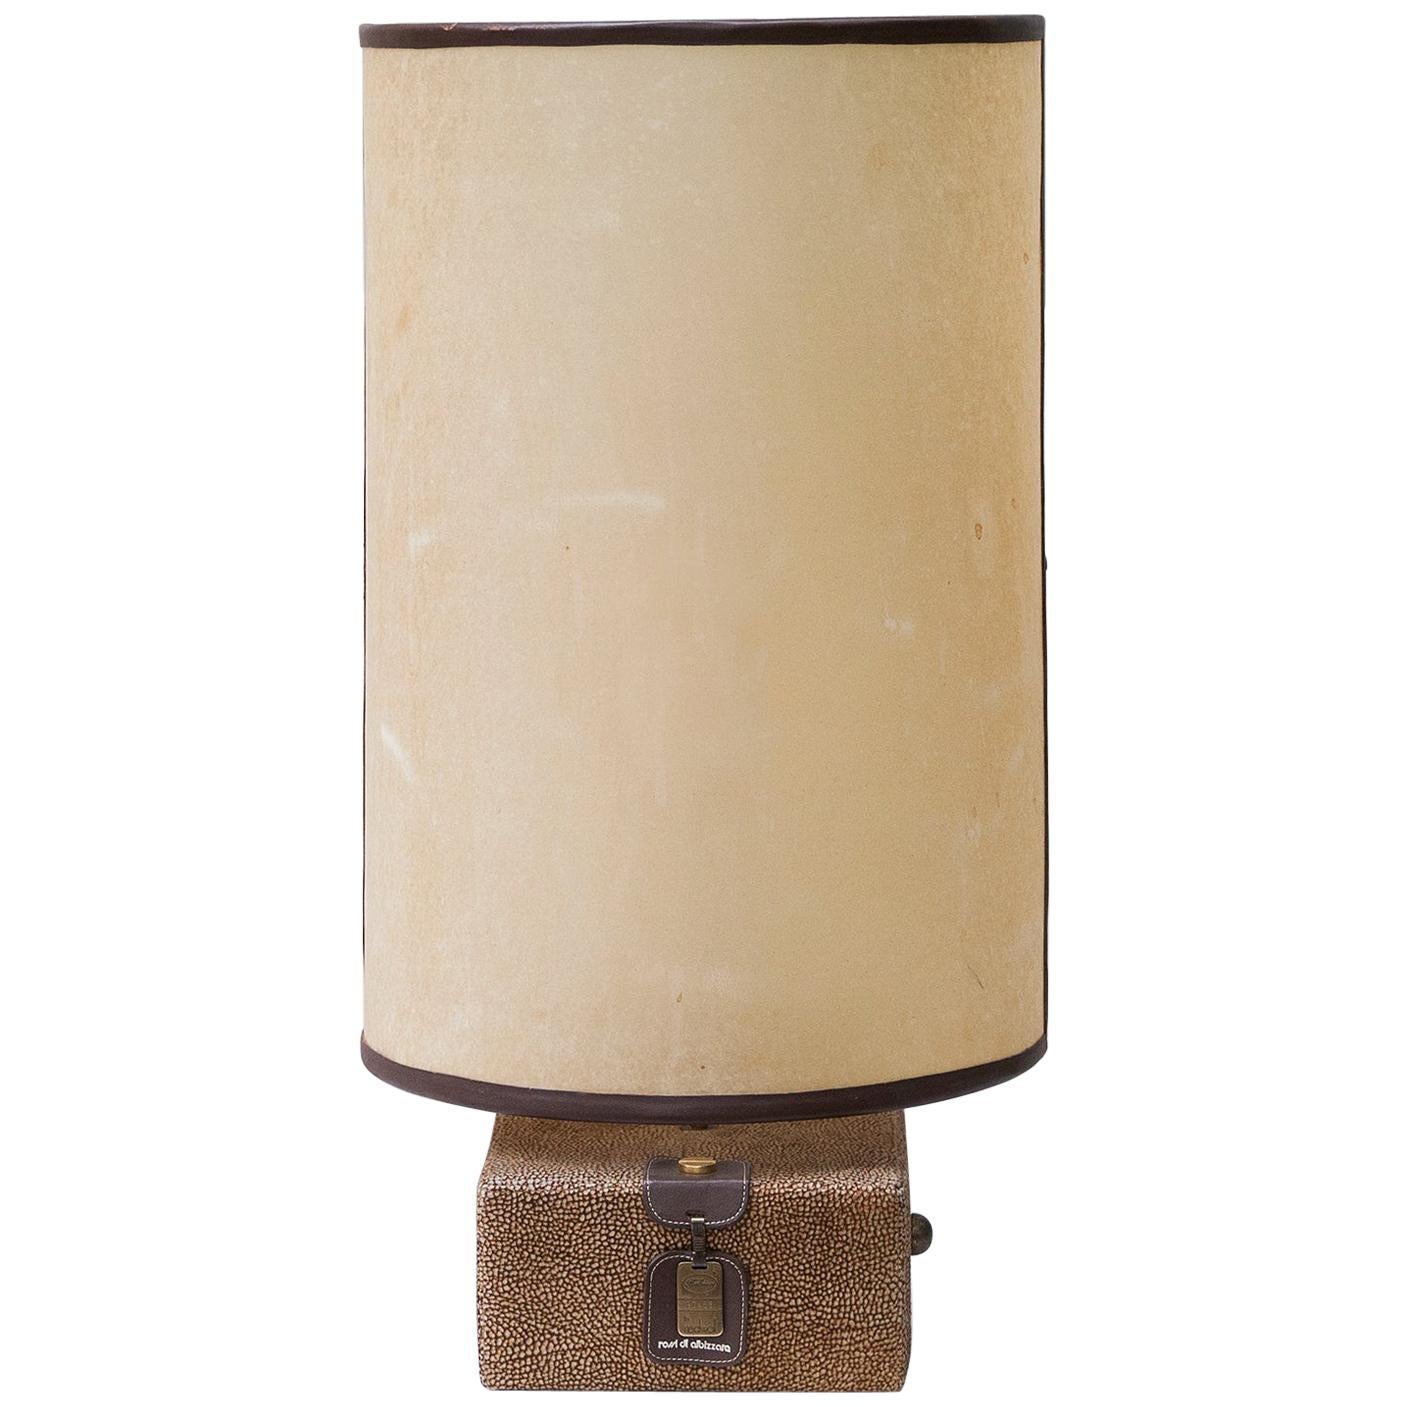 Carlo Bartoli Suede Leather Table Lamp by Borbonese, Italy, 1980